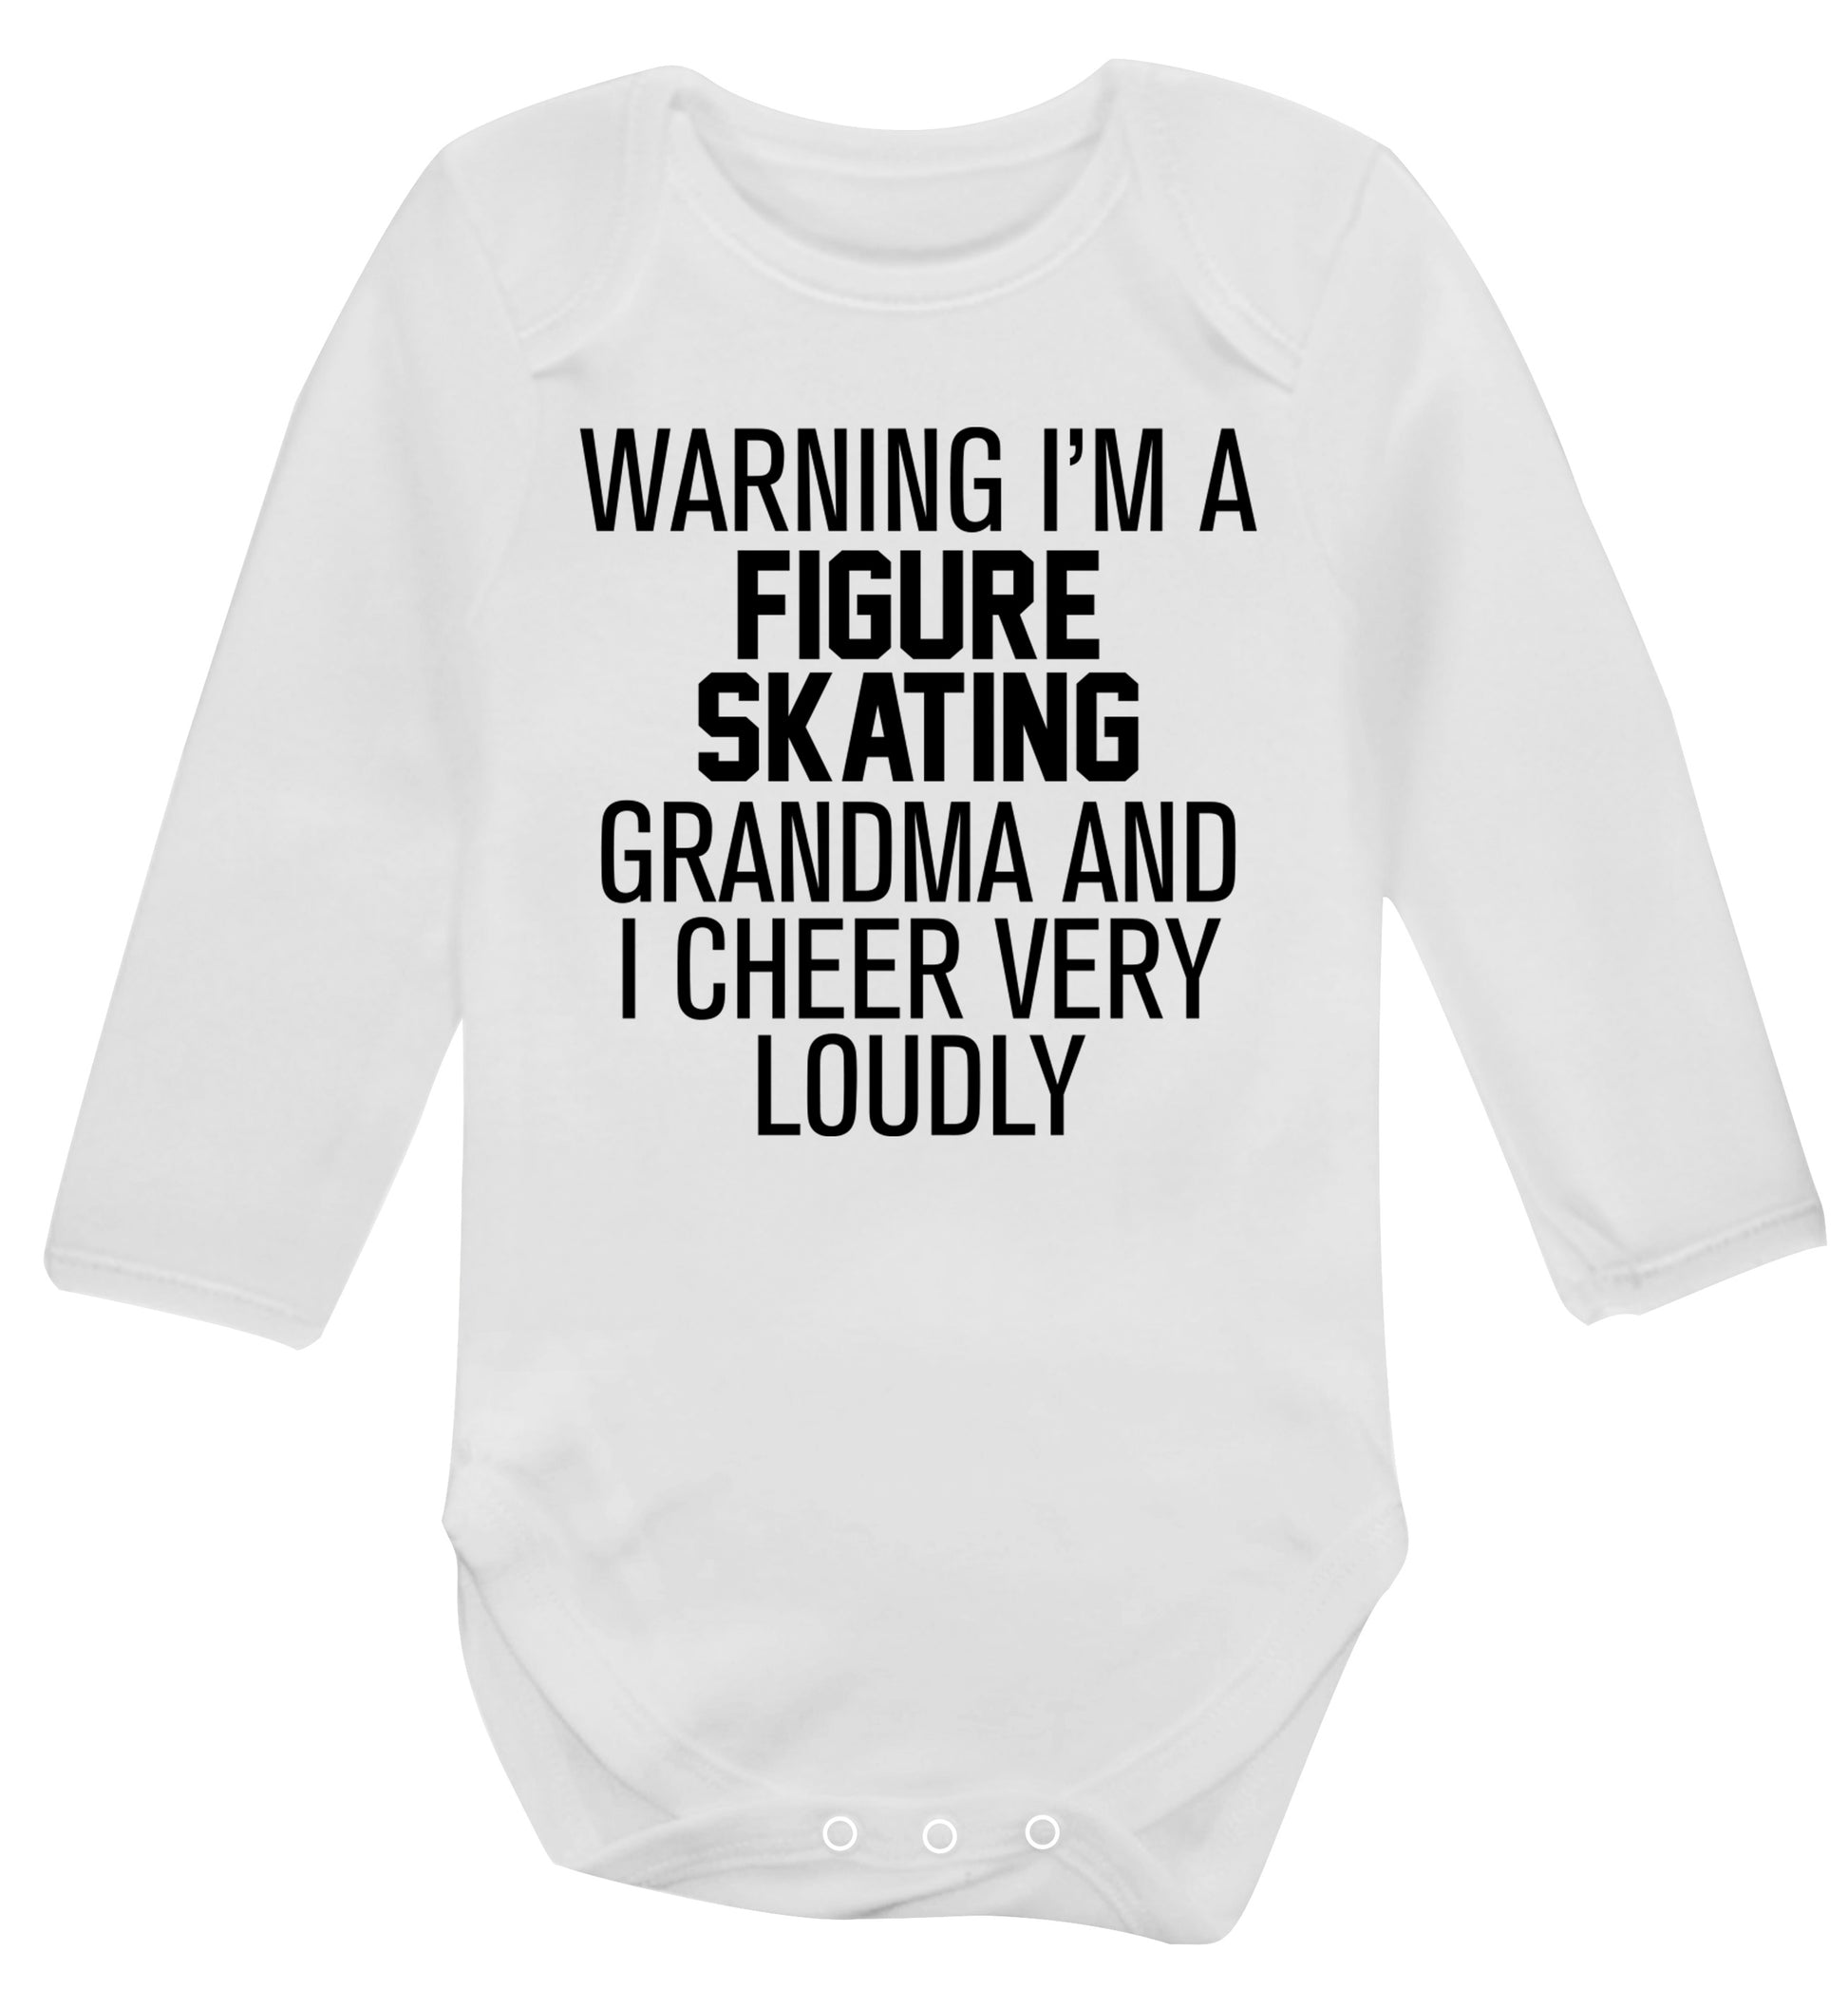 Warning I'm a figure skating grandma and I cheer very loudly Baby Vest long sleeved white 6-12 months